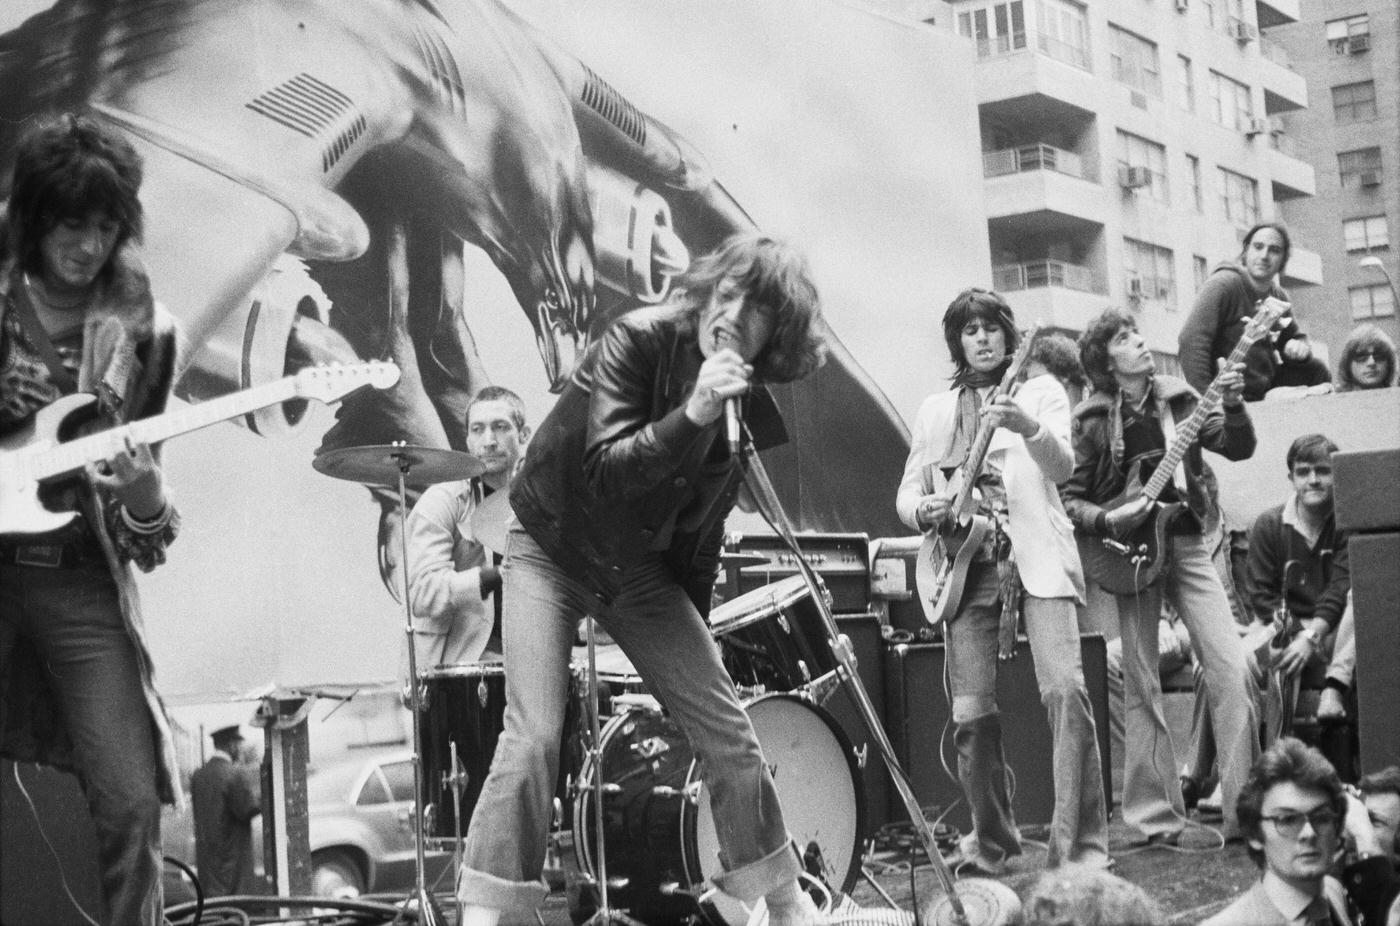 Ronnie Wood, Charlie Watts, Mick Jagger, Keith Richards, and Bill Wyman perform on a flatbed truck on Fifth Avenue, New York City, 1975.